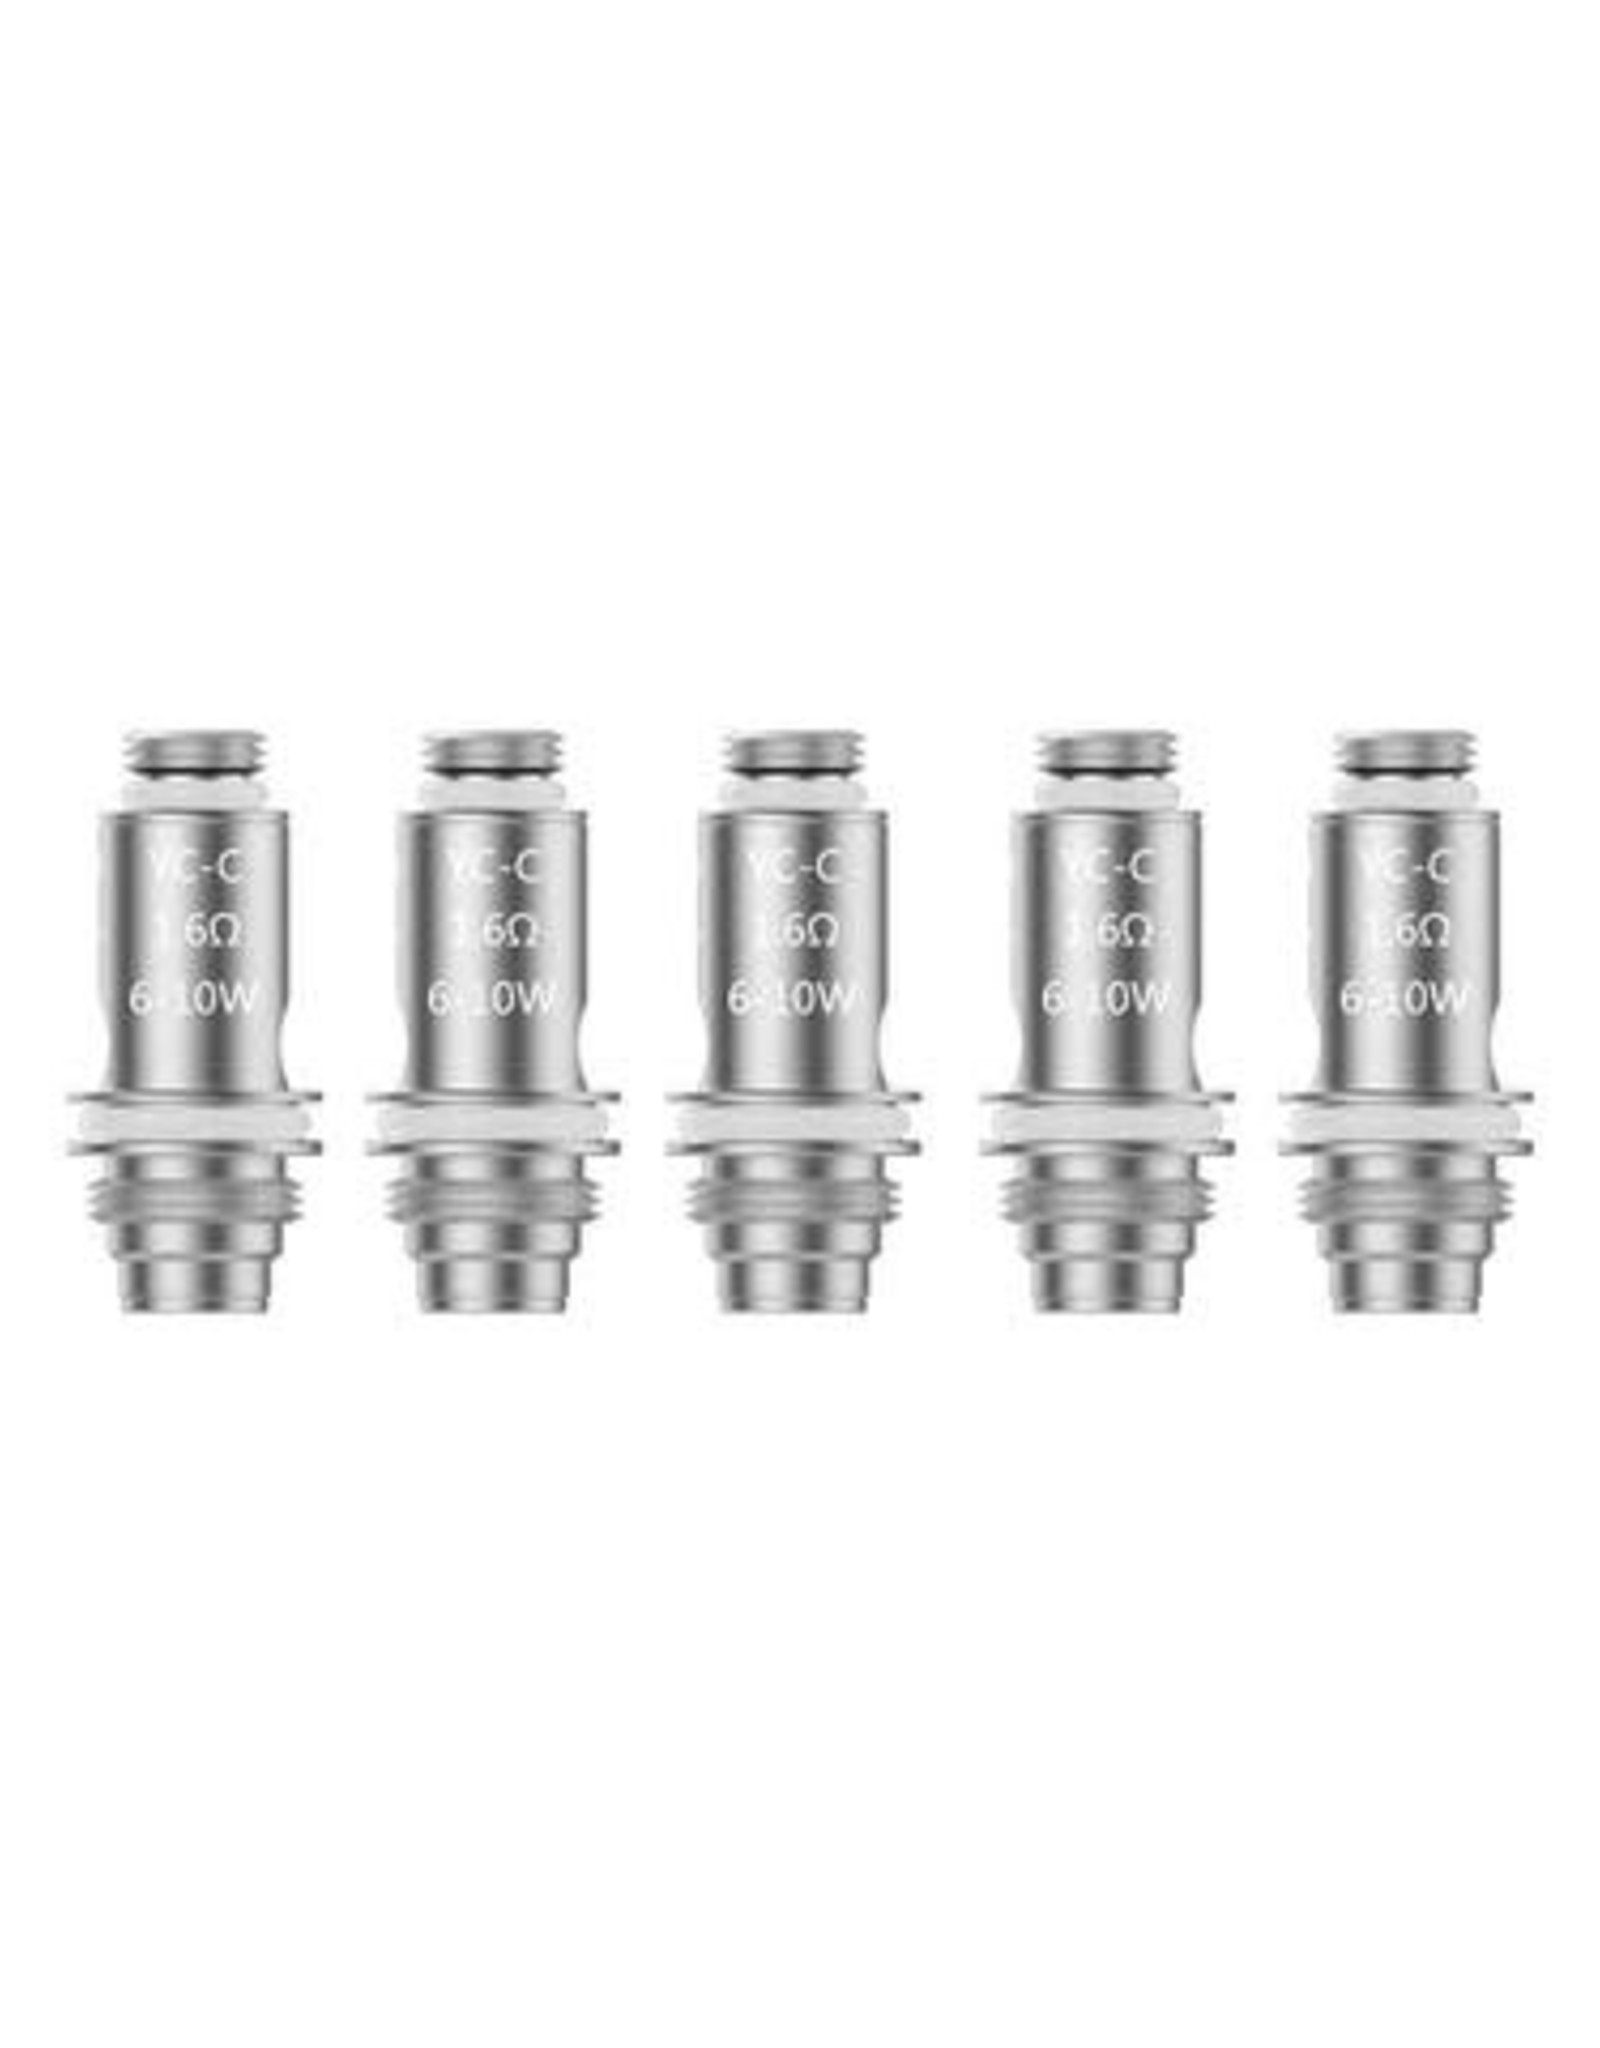 VOOPOO FINIC YC REPLACEMENT COIL (5 PACK)